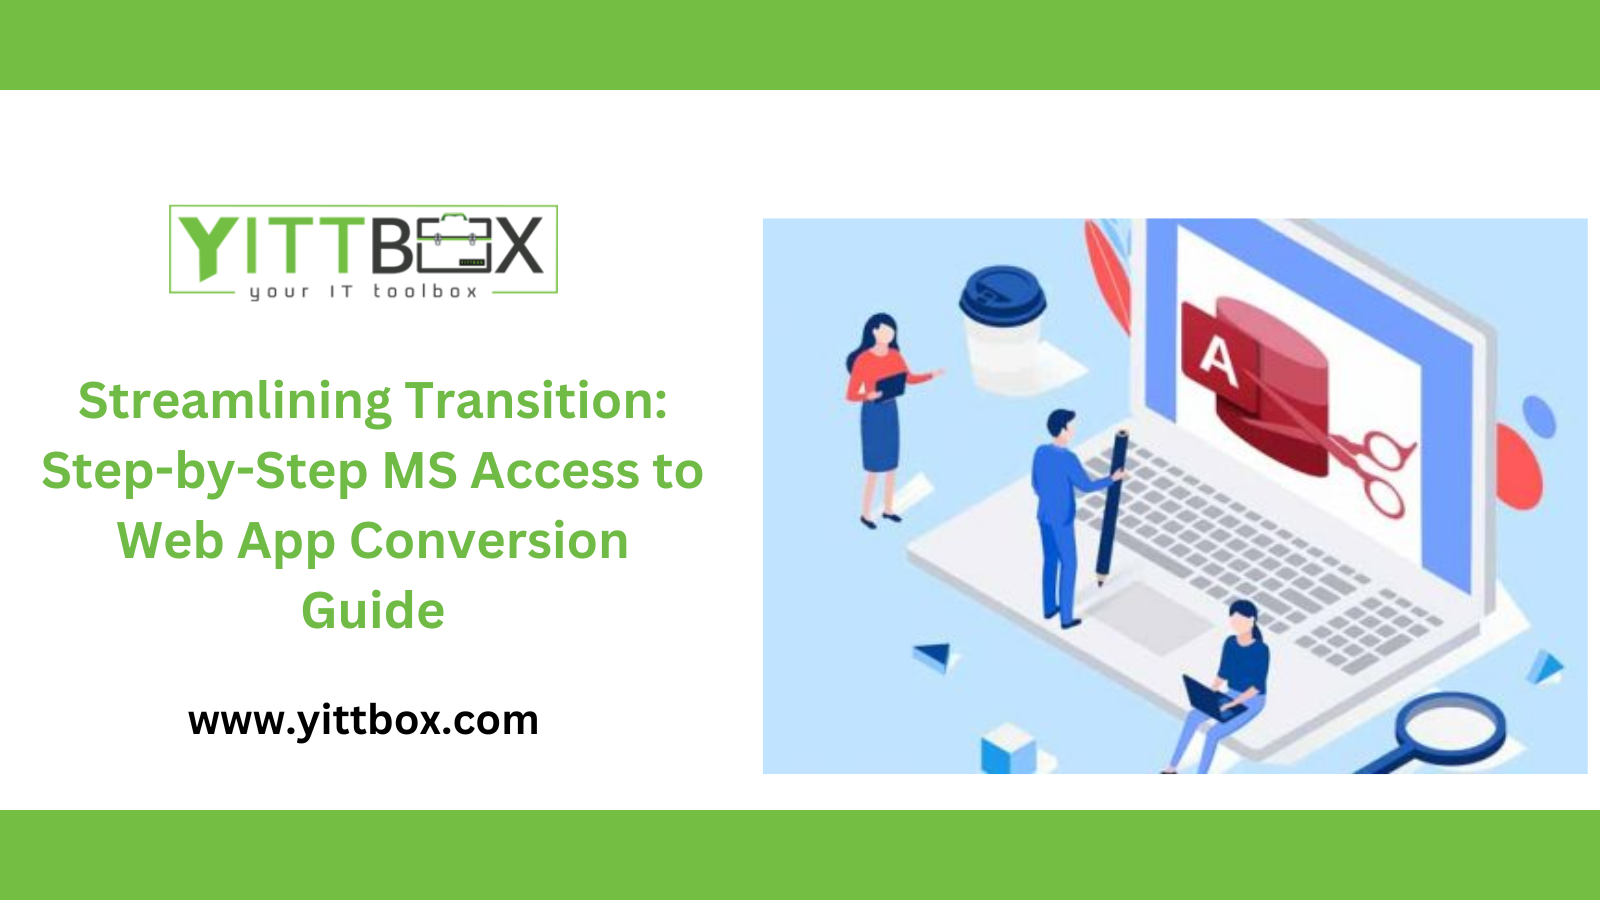 Streamlining Transition: Step-by-Step MS Access to Web App Conversion Guide